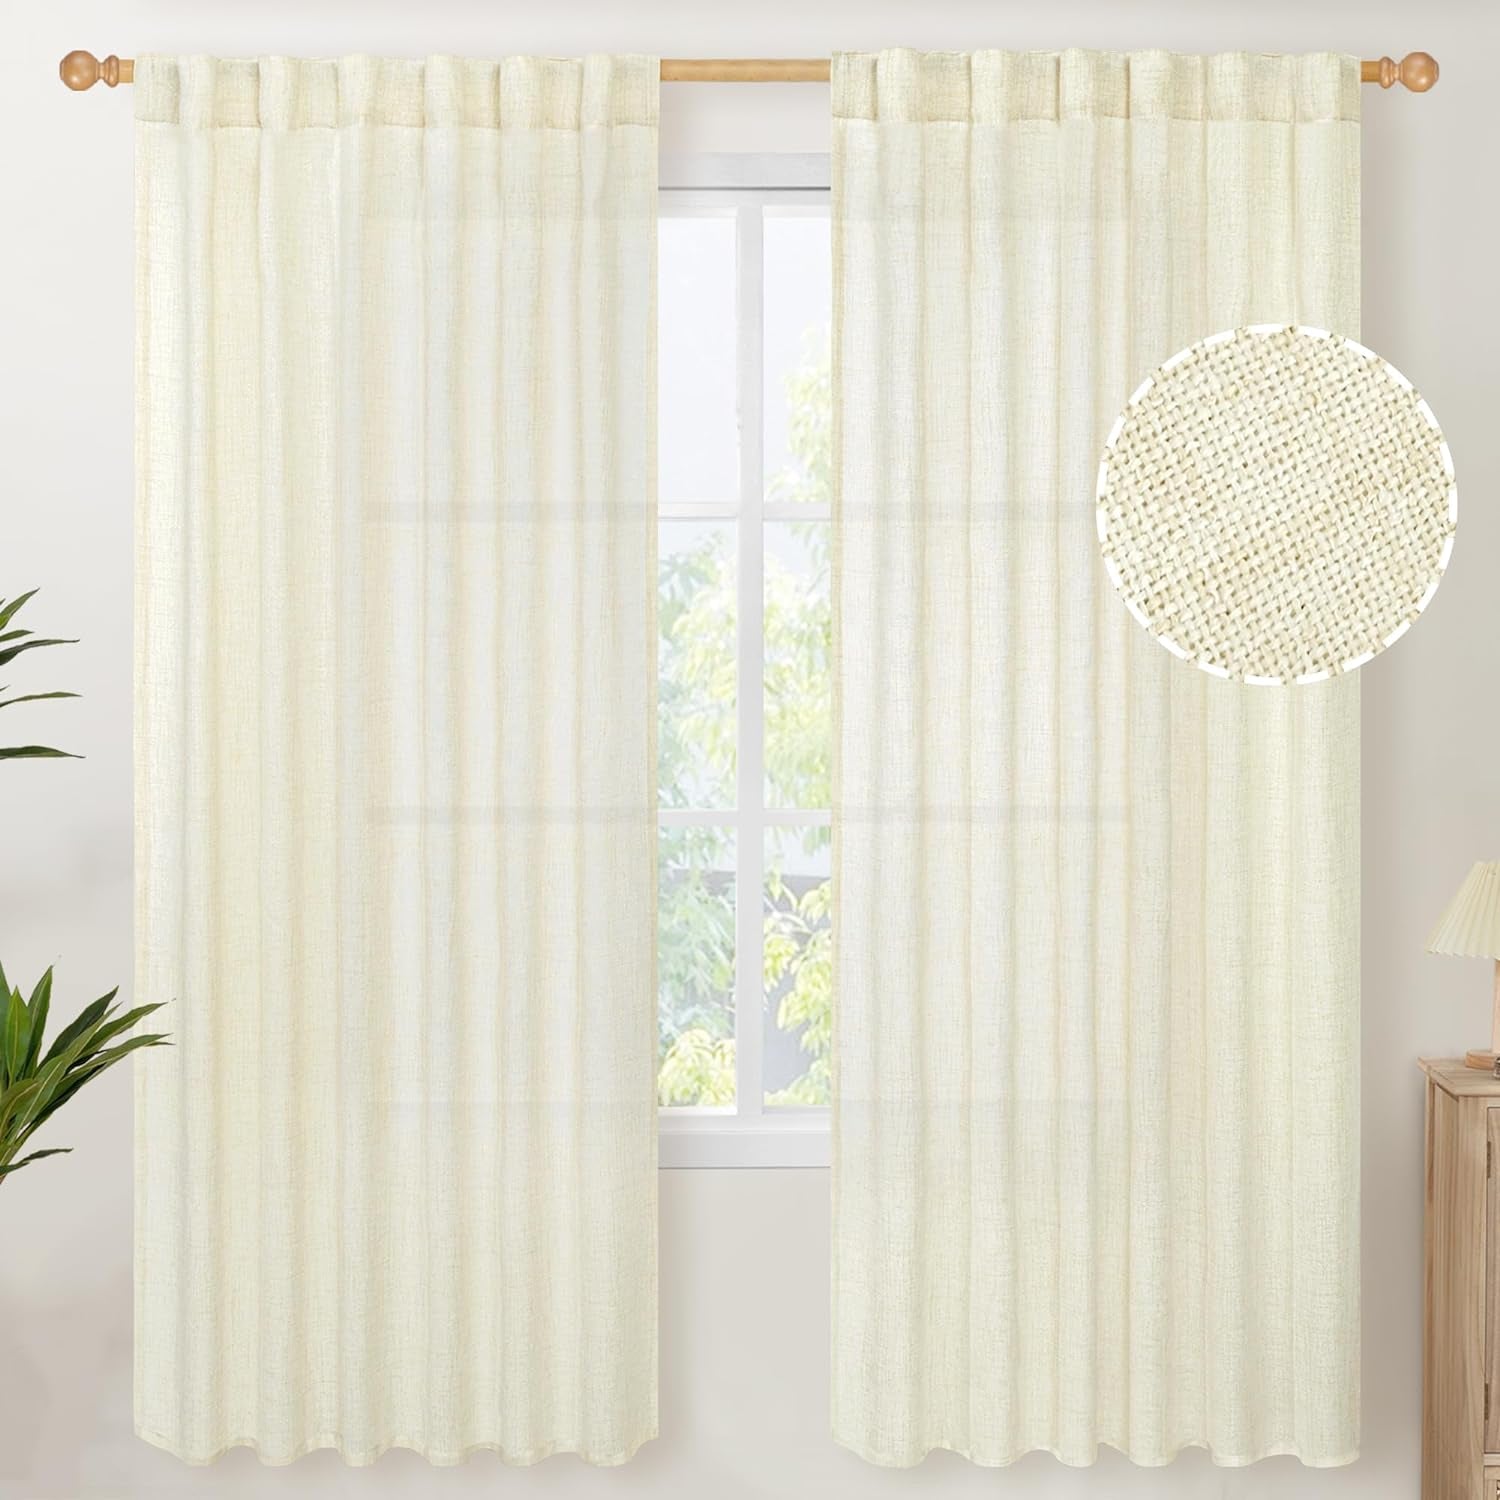 Youngstex Natural Linen Curtains 72 Inch Length 2 Panels for Living Room Light Filtering Textured Window Drapes for Bedroom Dining Office Back Tab Rod Pocket, 52 X 72 Inch  YoungsTex Cream 52W X 72L 